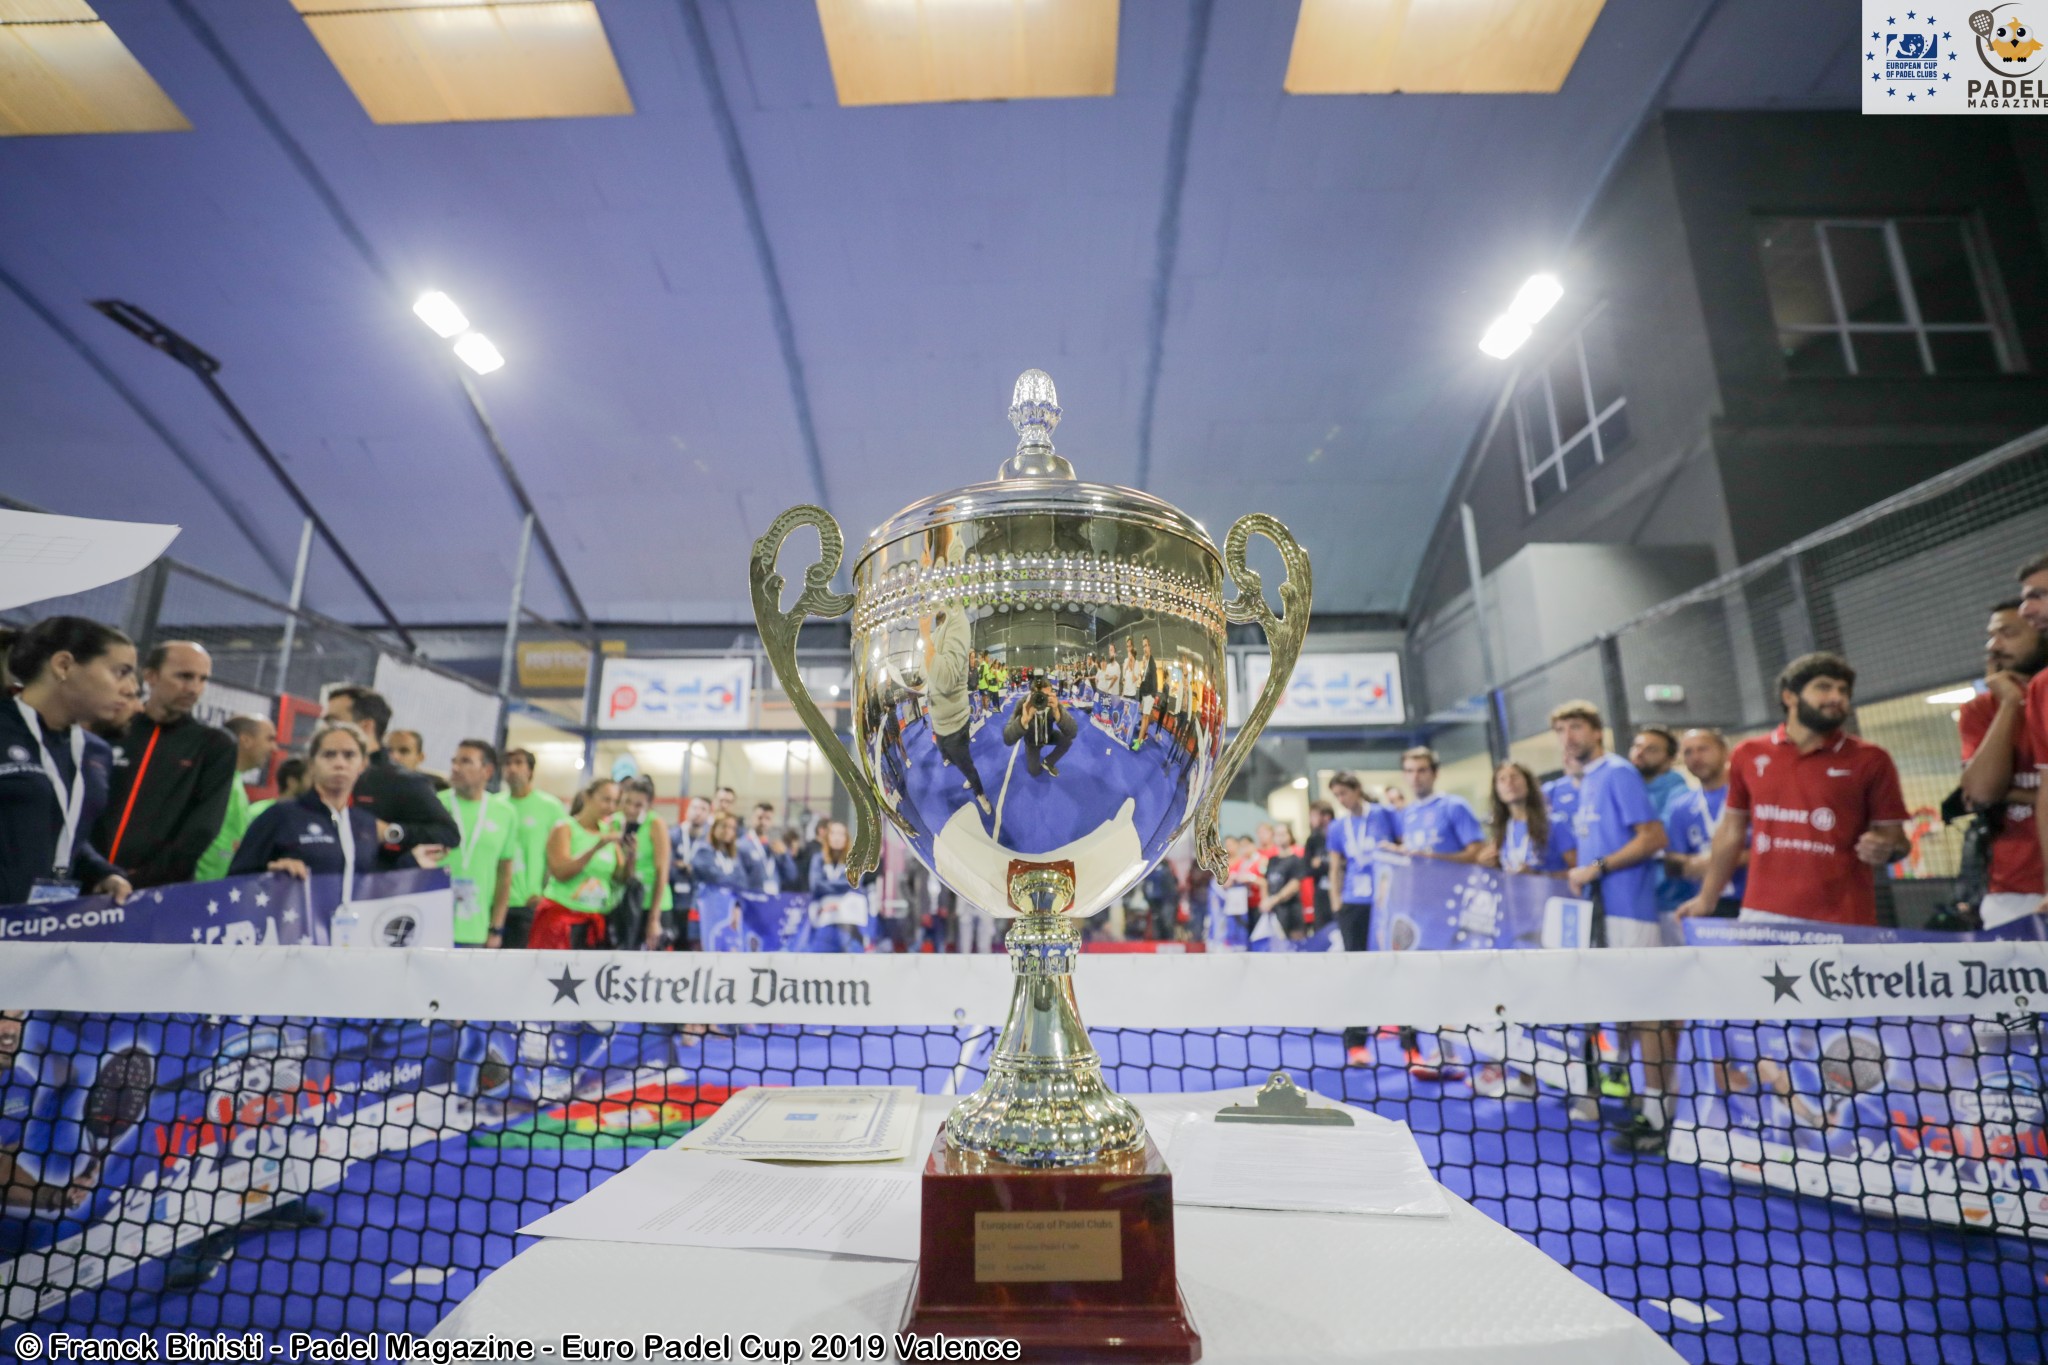 coupe europe padel